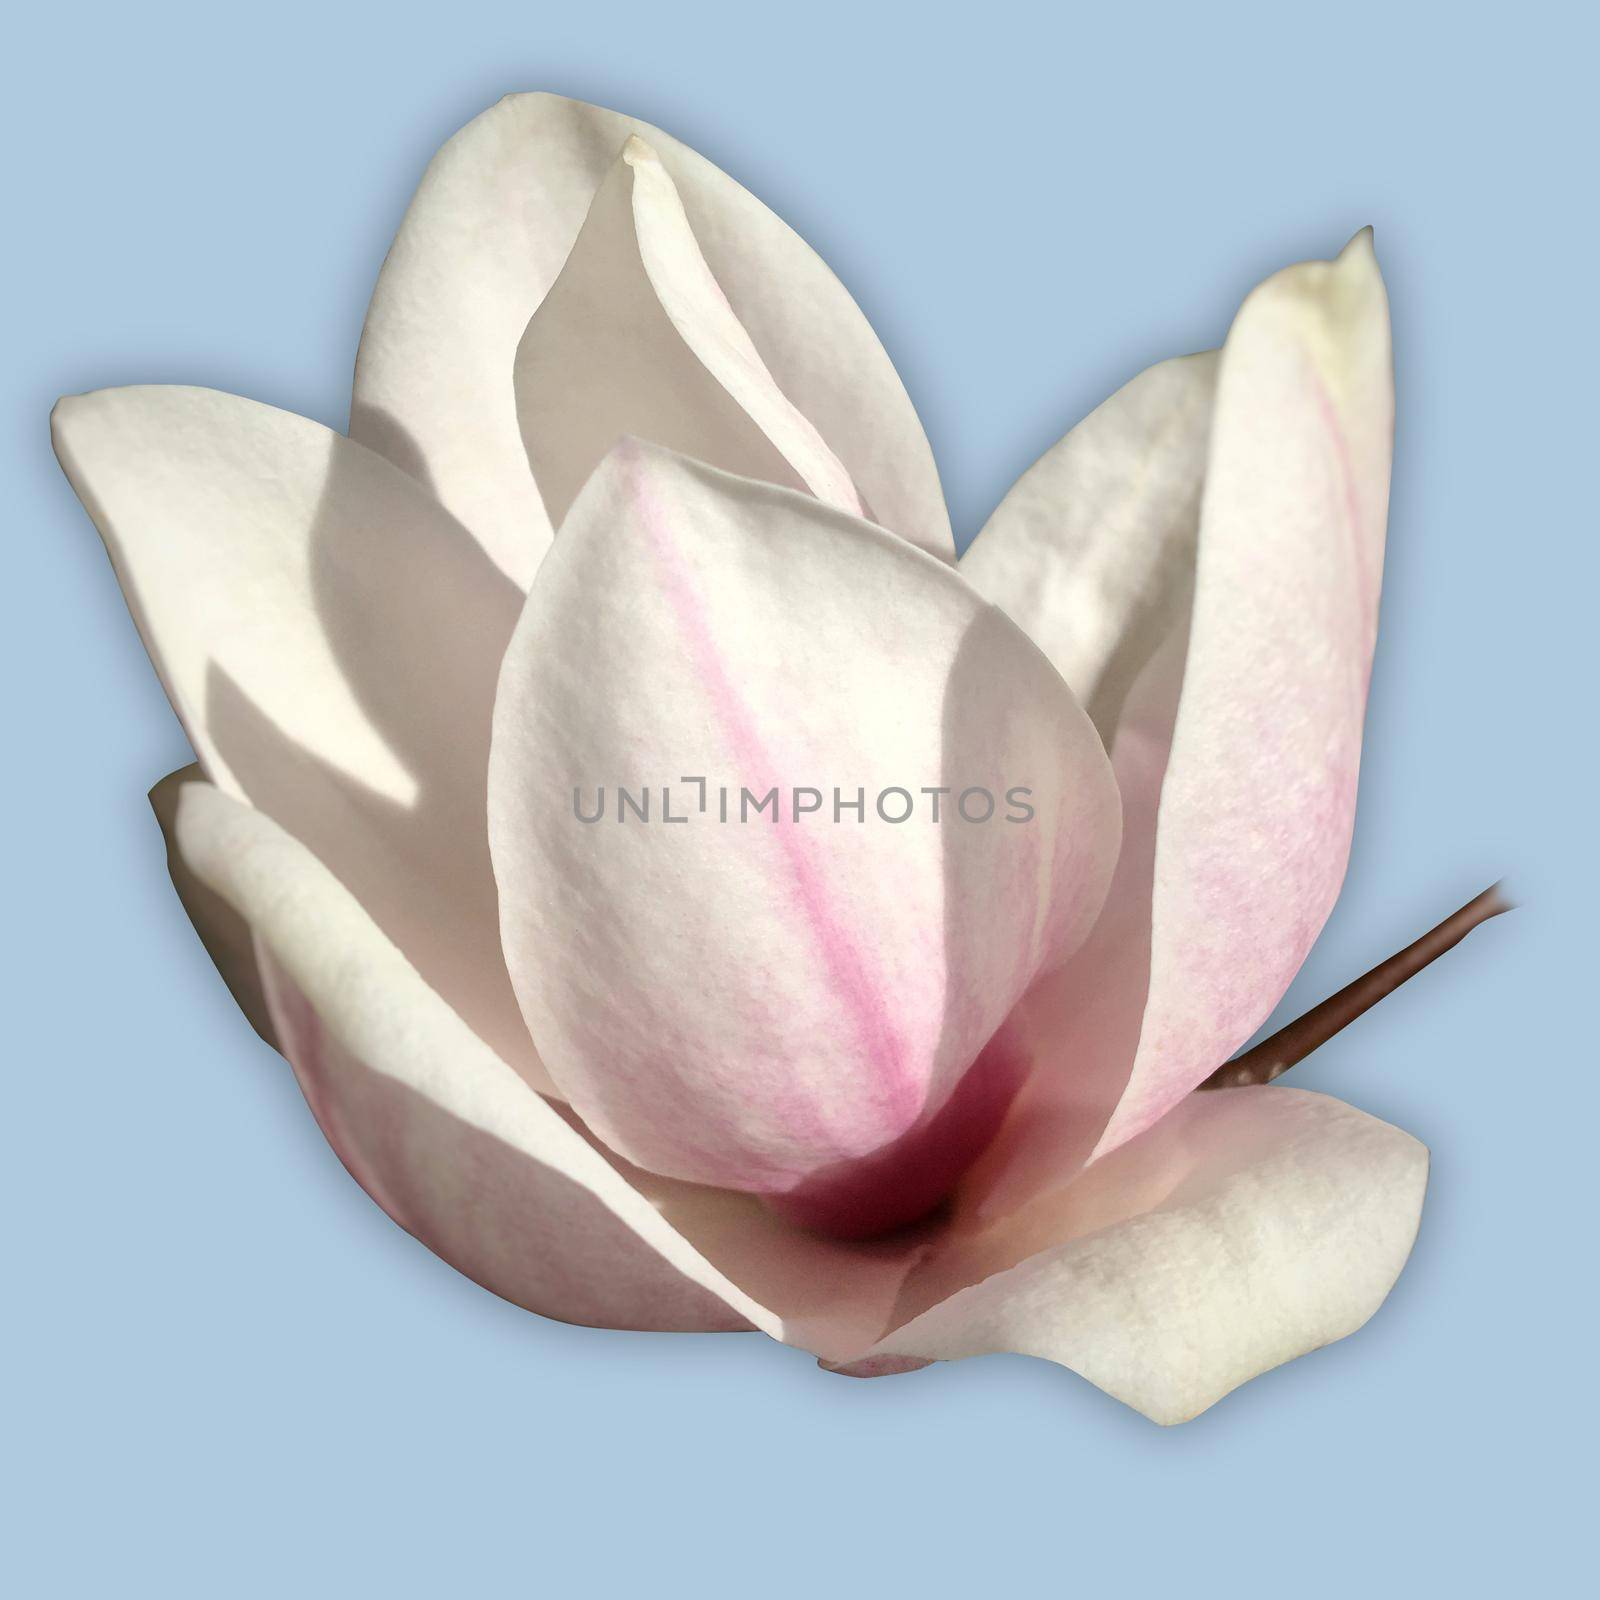 One single soft pink flower of a magnolia tree in bloom. The picture is cut out on a light blue background.